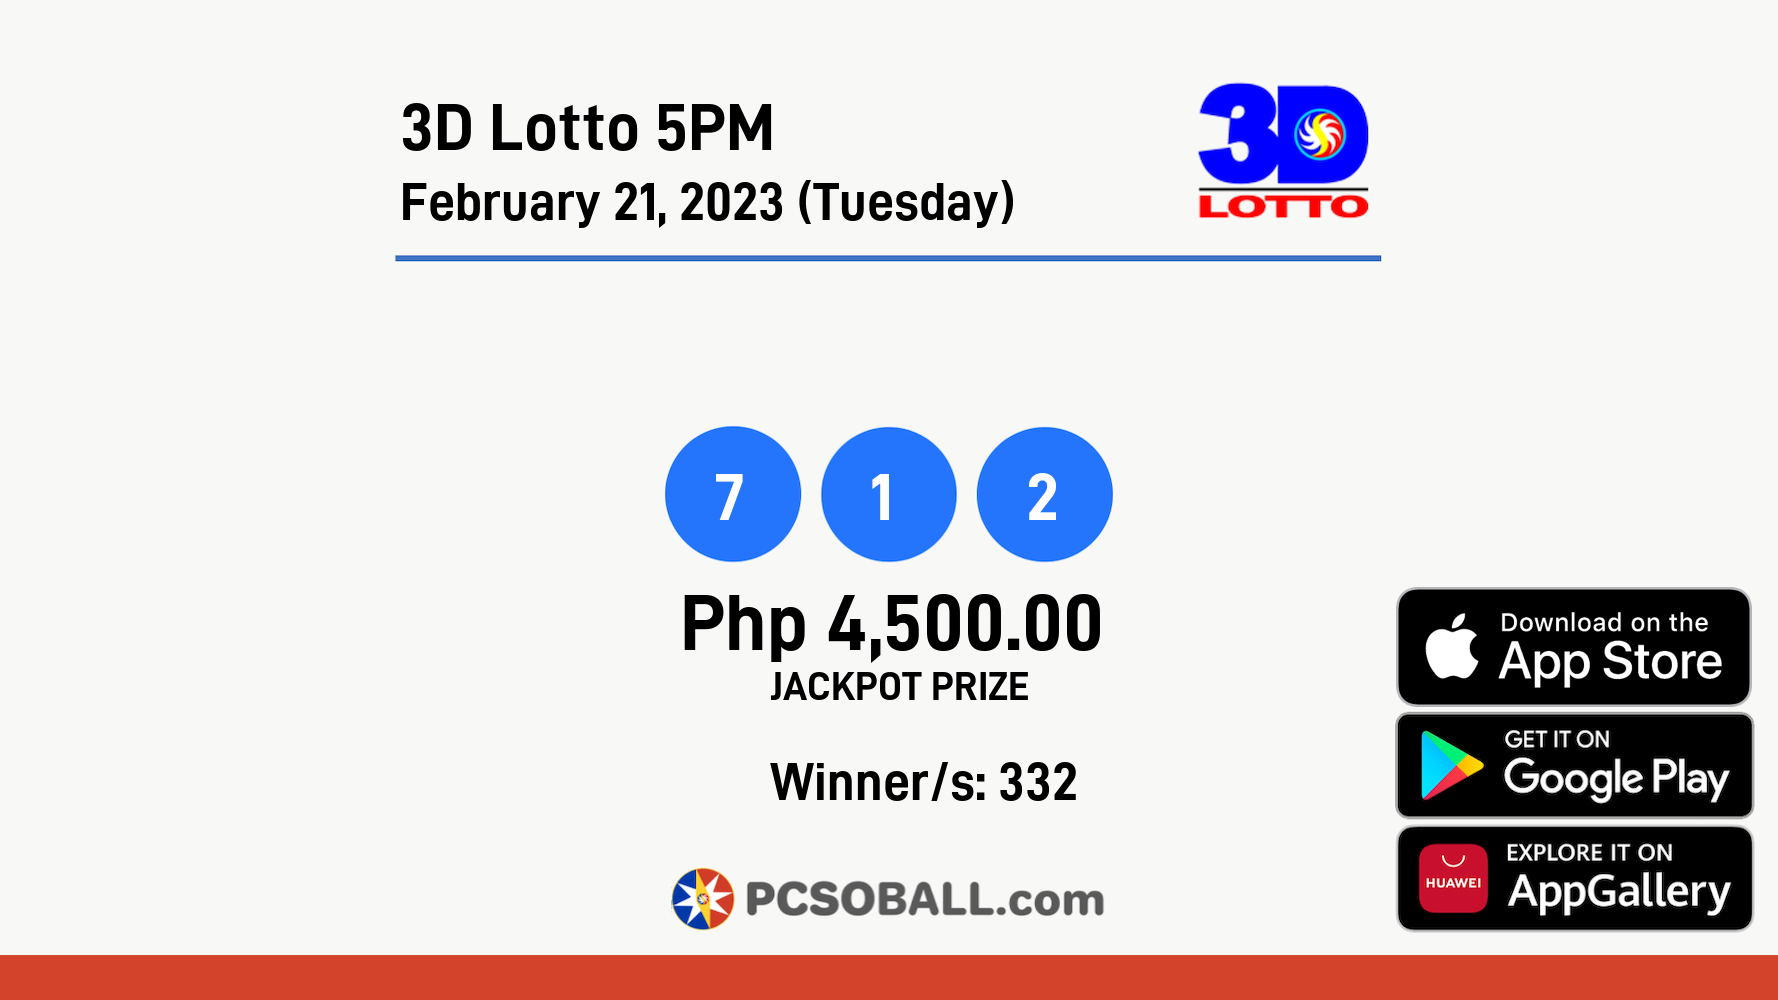 3D Lotto 5PM February 21, 2023 (Tuesday) Result